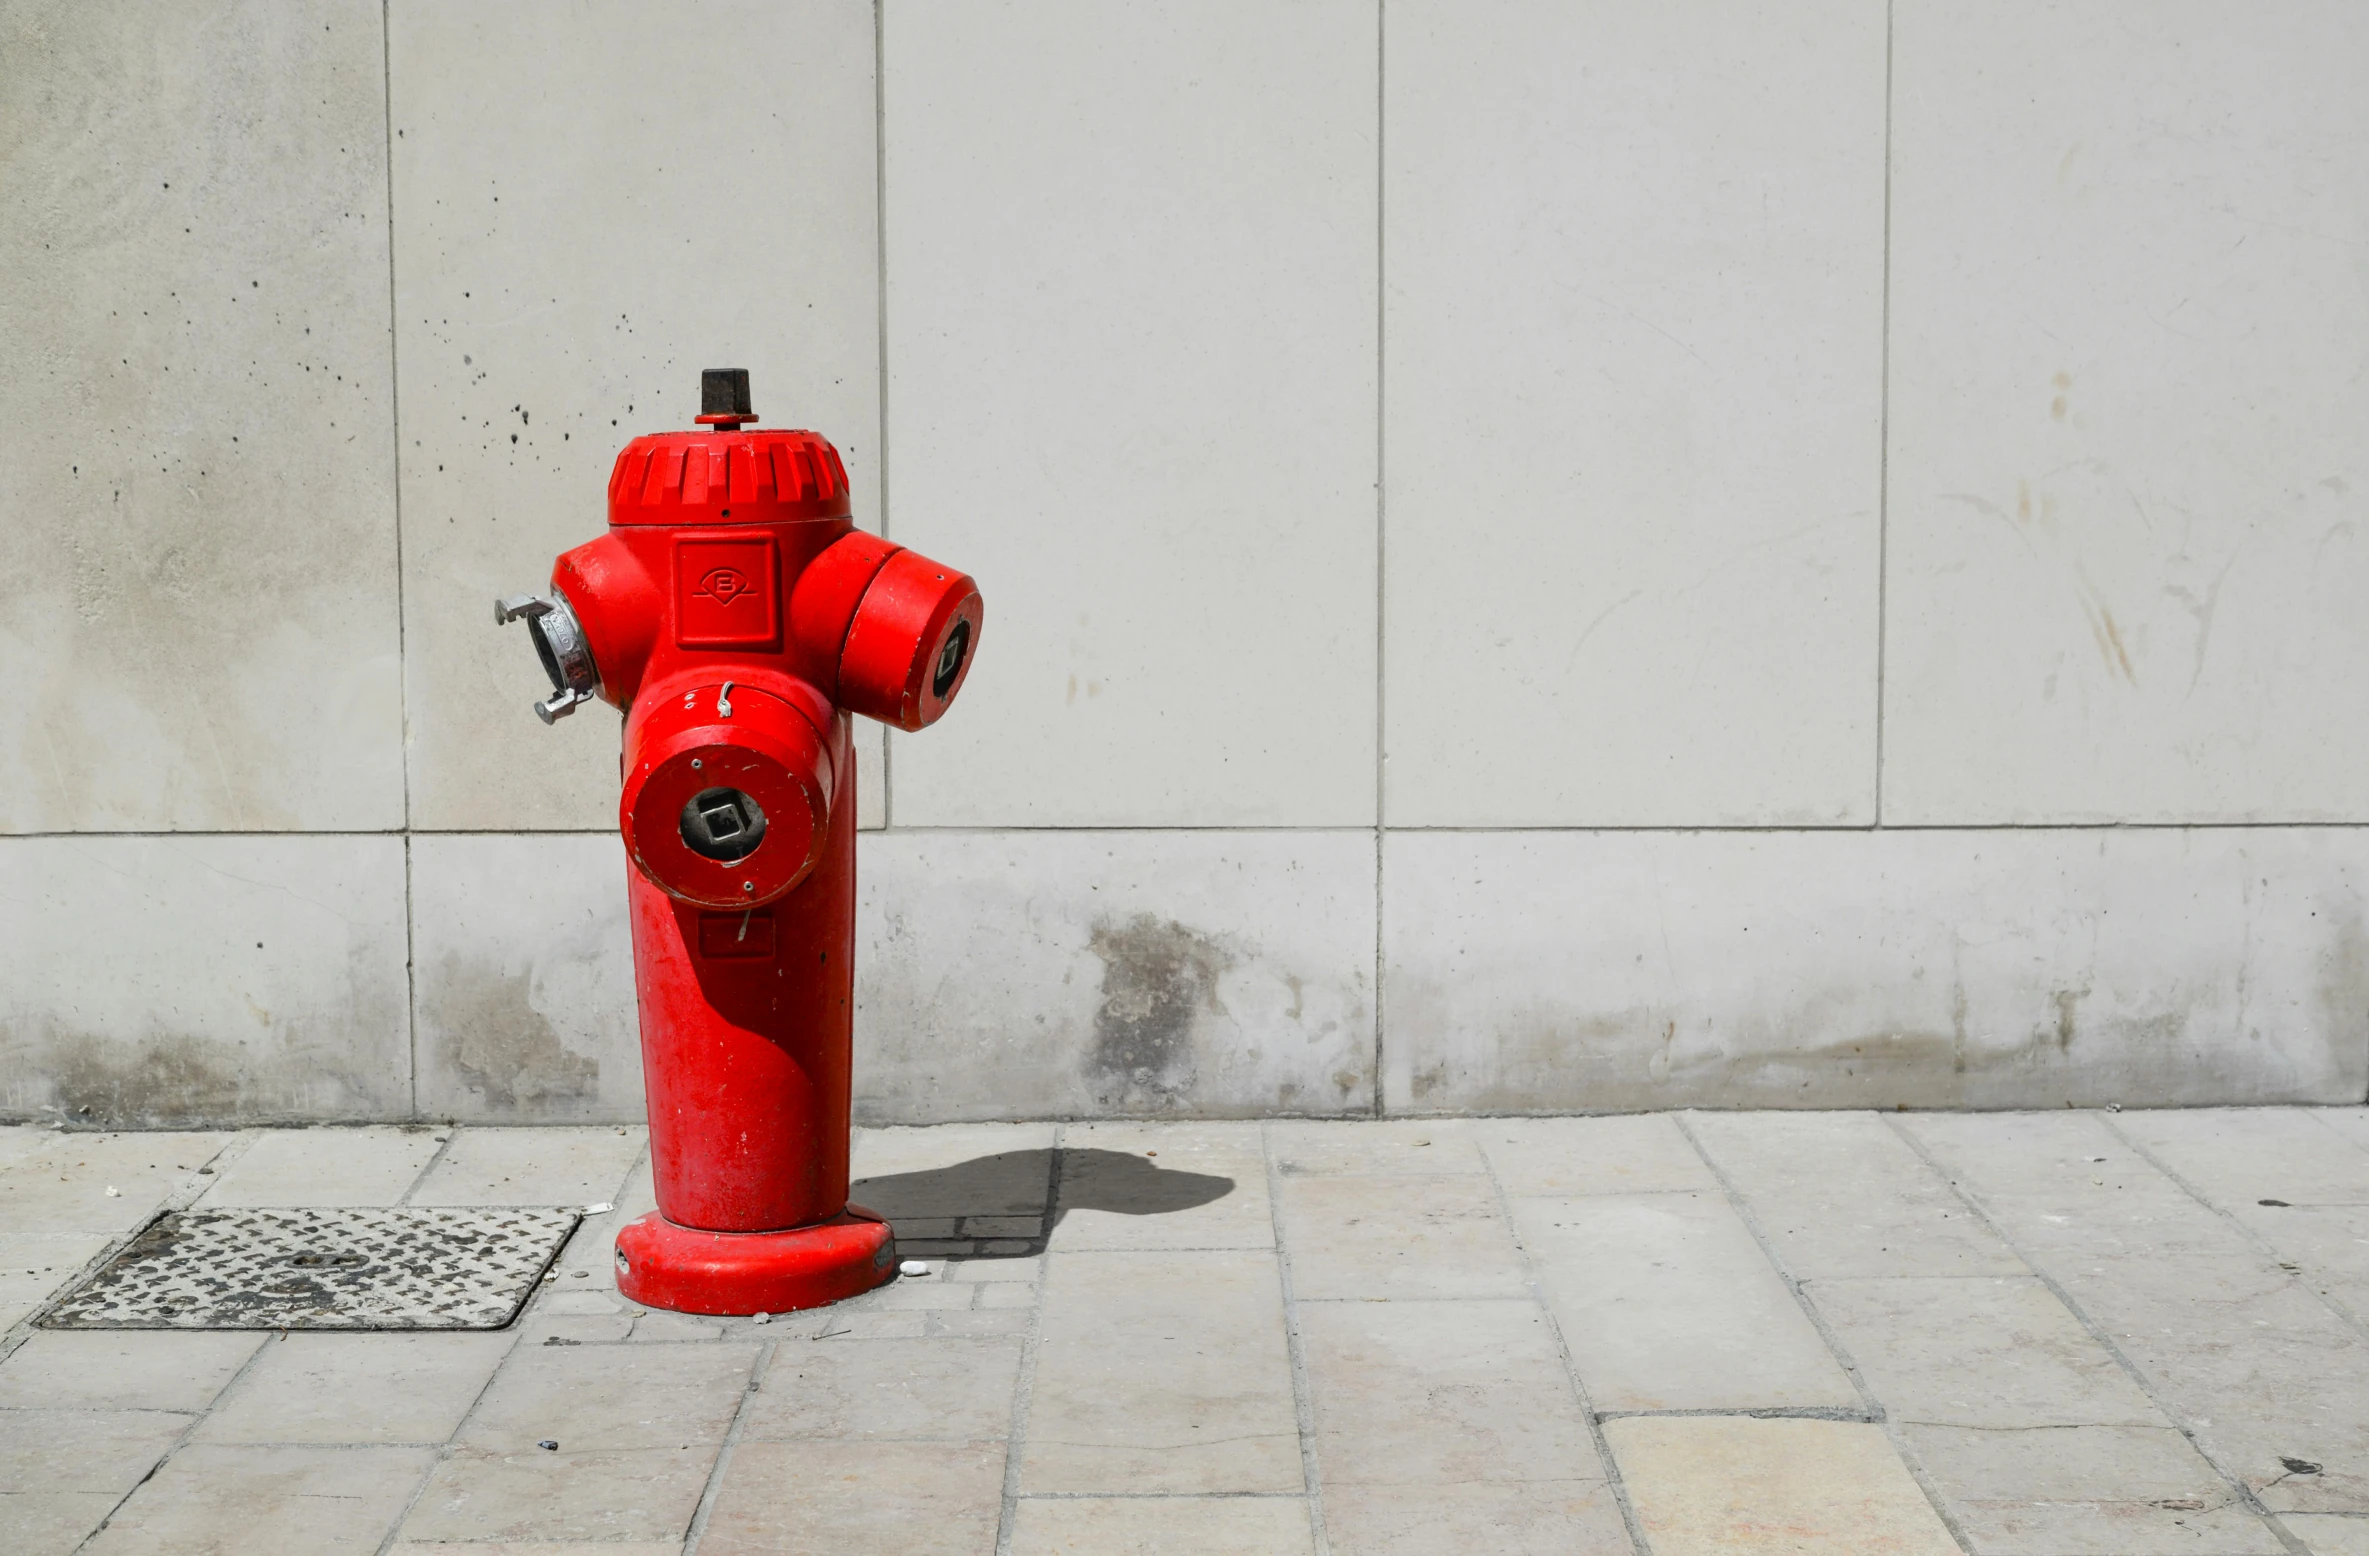 a red fire hydrant on the corner of a city street